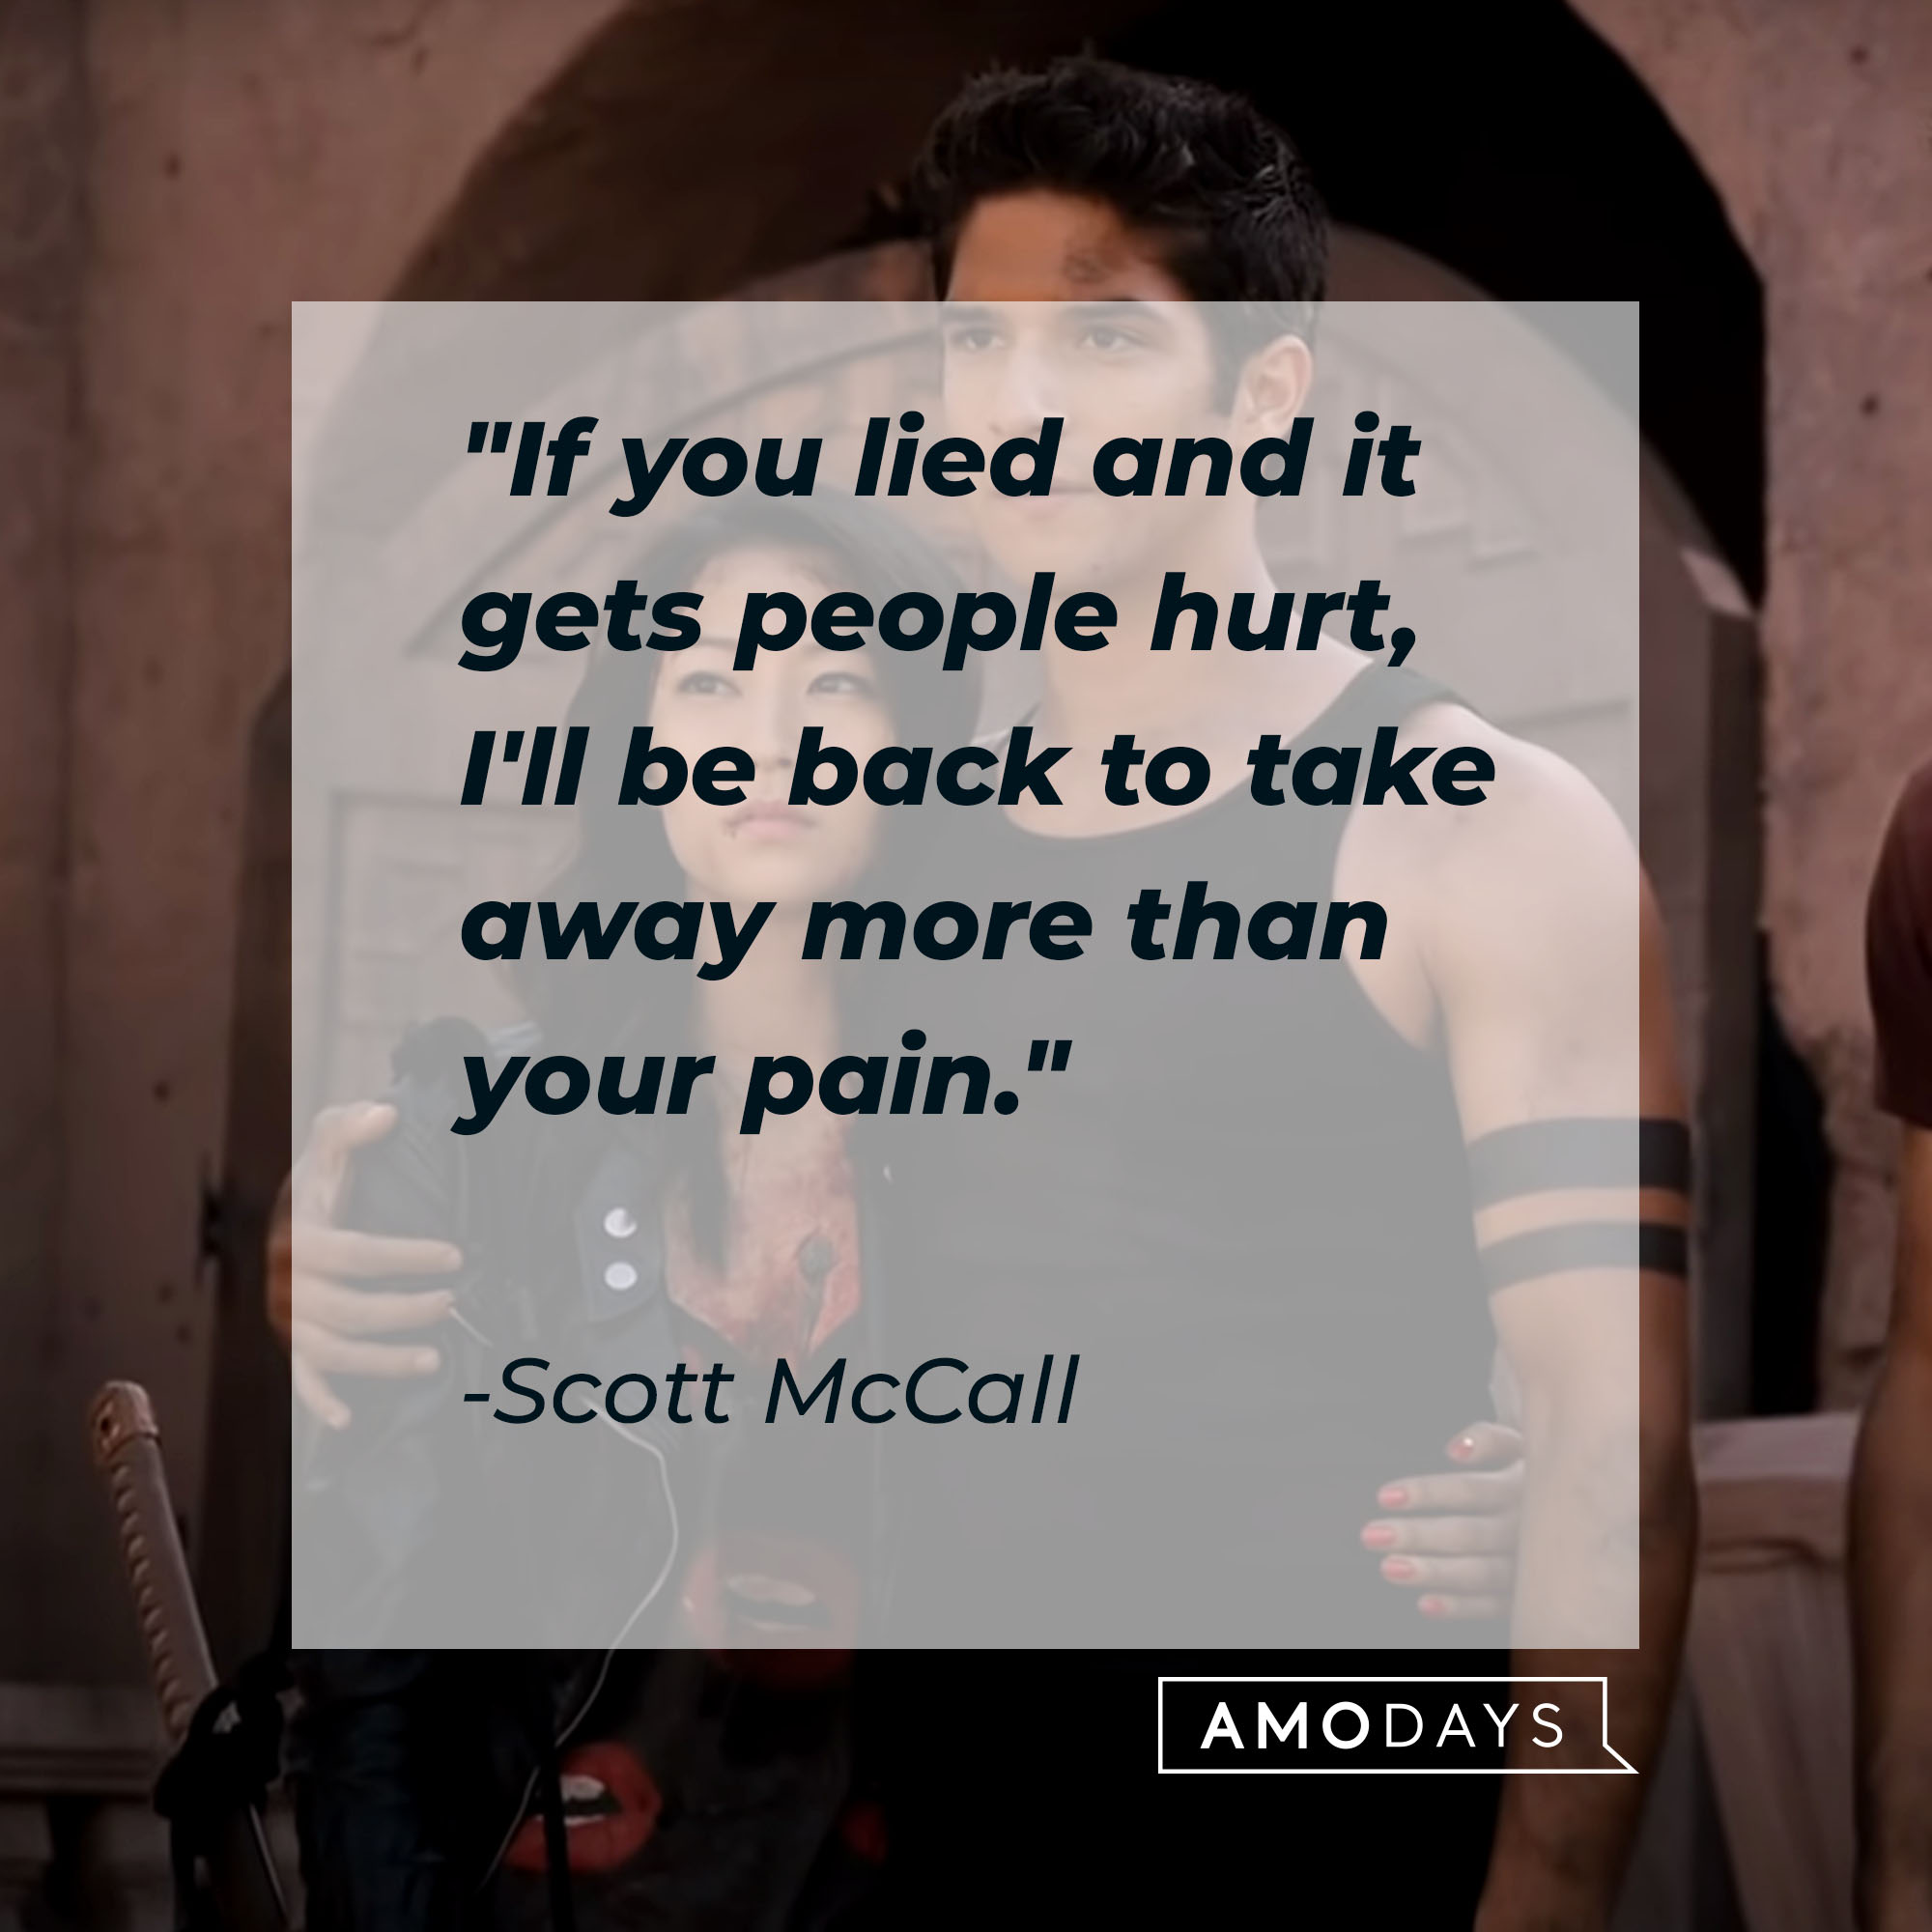 Scott McCall's quote: "If you lied and it gets people hurt, I'll be back to take away more than your pain" | Source: Youtube.com/WolfWatch